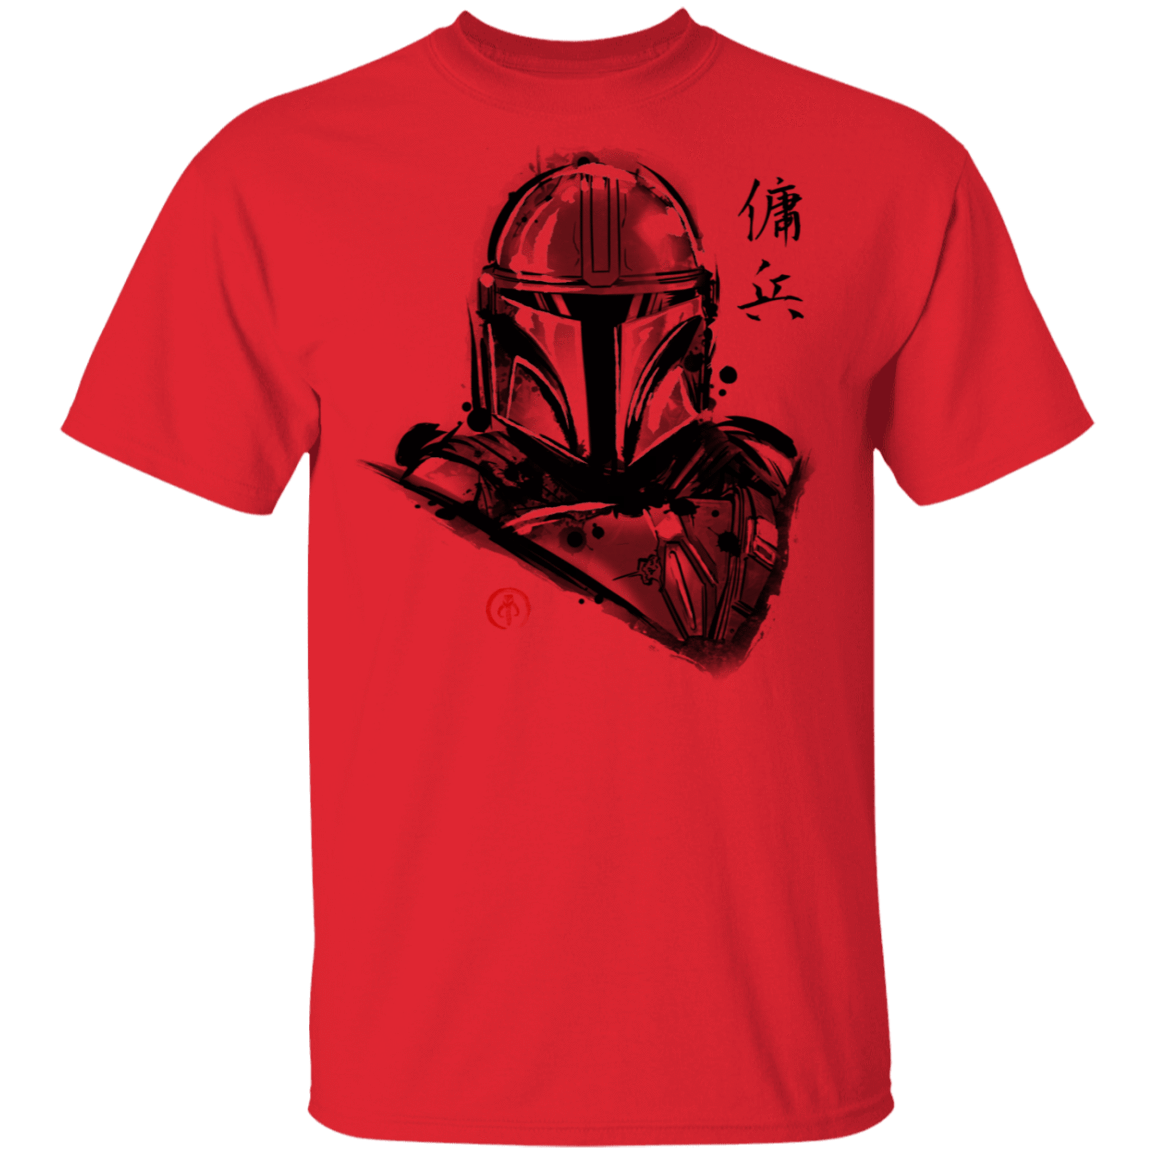 T-Shirts Red / S Most Wanted Mercenary T-Shirt